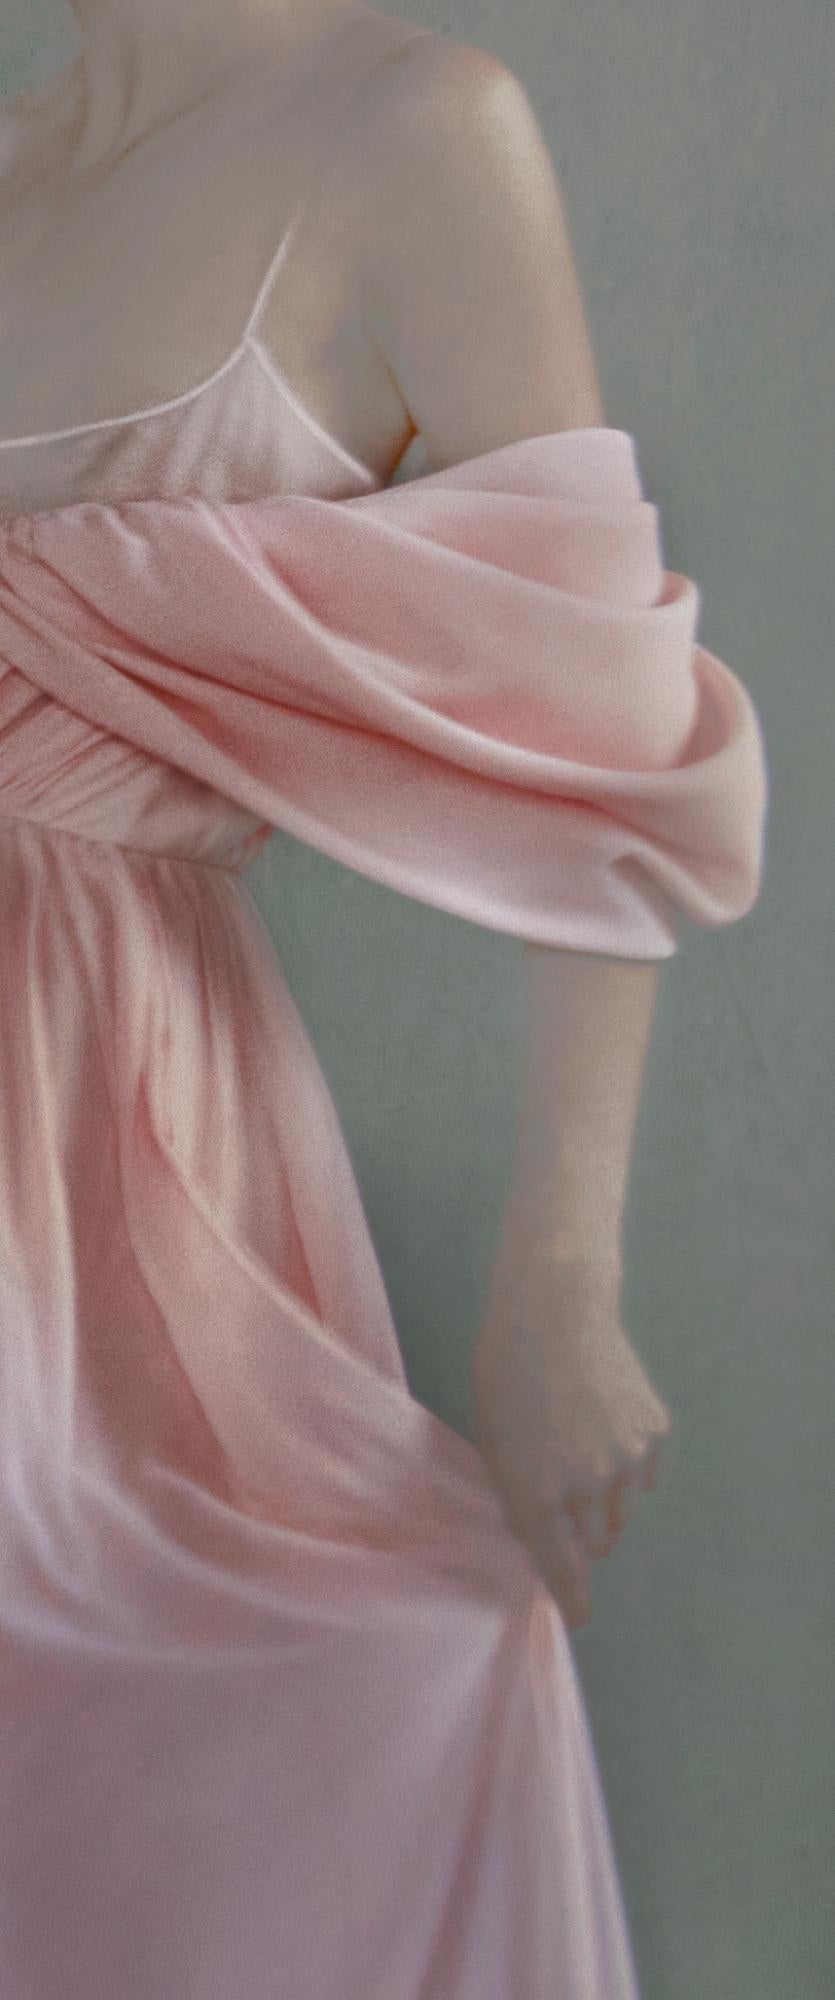 Erik MADIGAN HECK (*1983, United States)
Not Titled Yet, tbd
Chromogenic print
Sheet 101.6 x 42.44 cm (40 x 16 3/4 in.)
Edition of 9 plus 2 artist's proofs (#1/9)
print only

Originally from Excelsior, Minnesota, Erik Madigan Heck (*1983) is one of